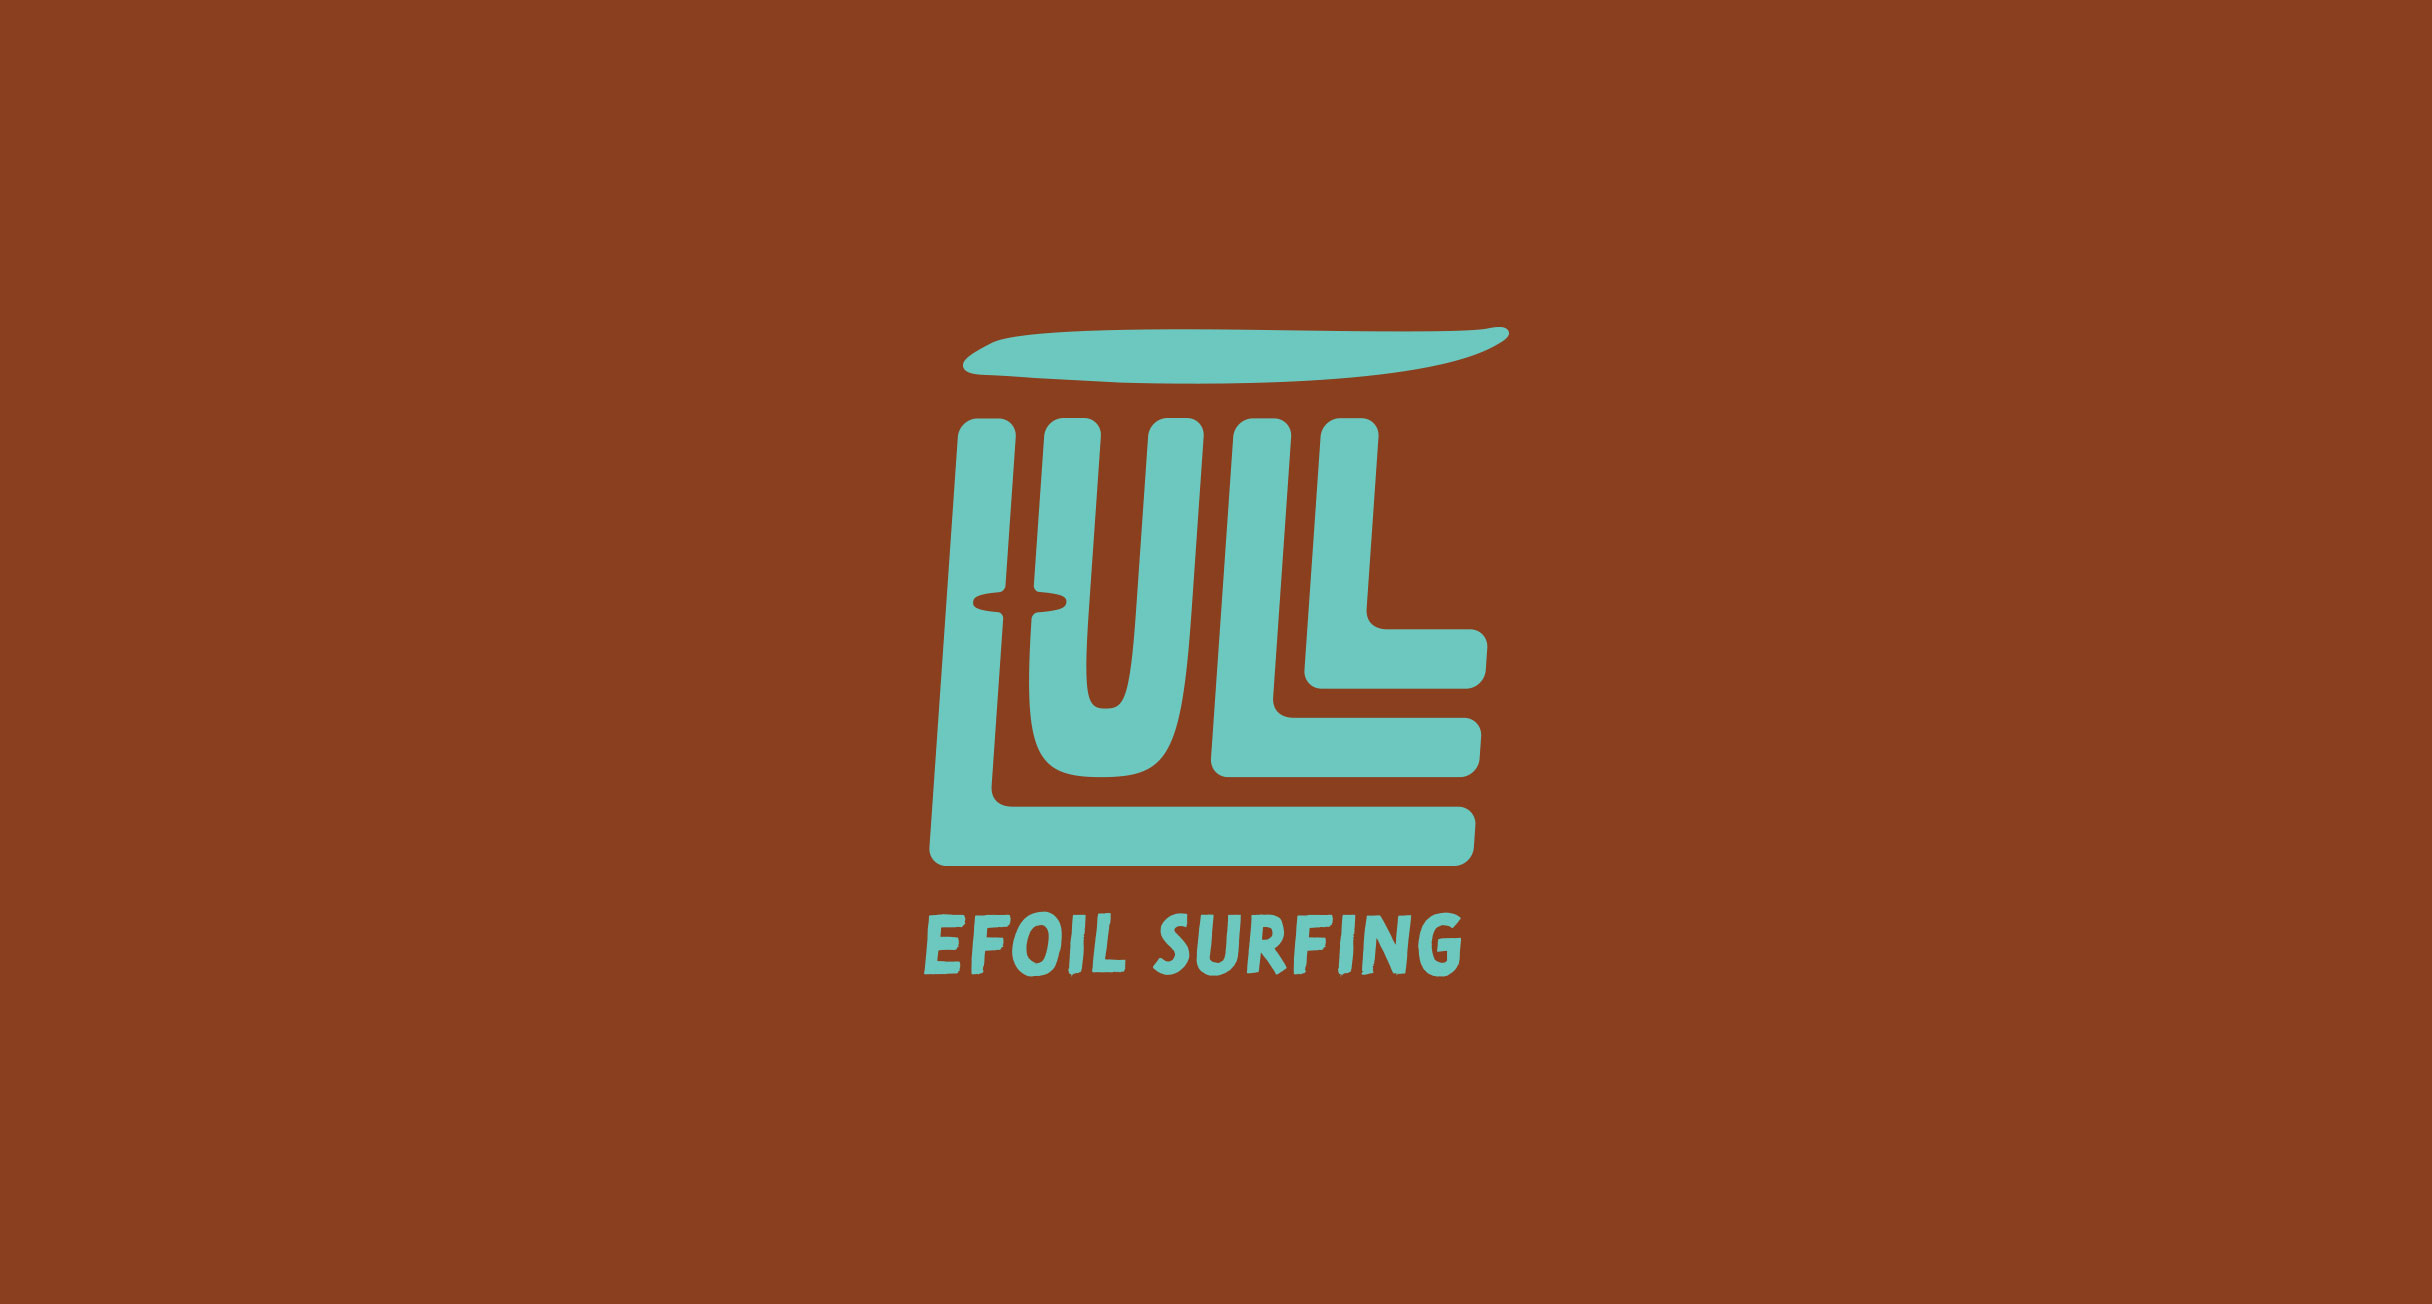 LULL BRANDING – Visual and Verbal Identity for E-Foil Surfing Client